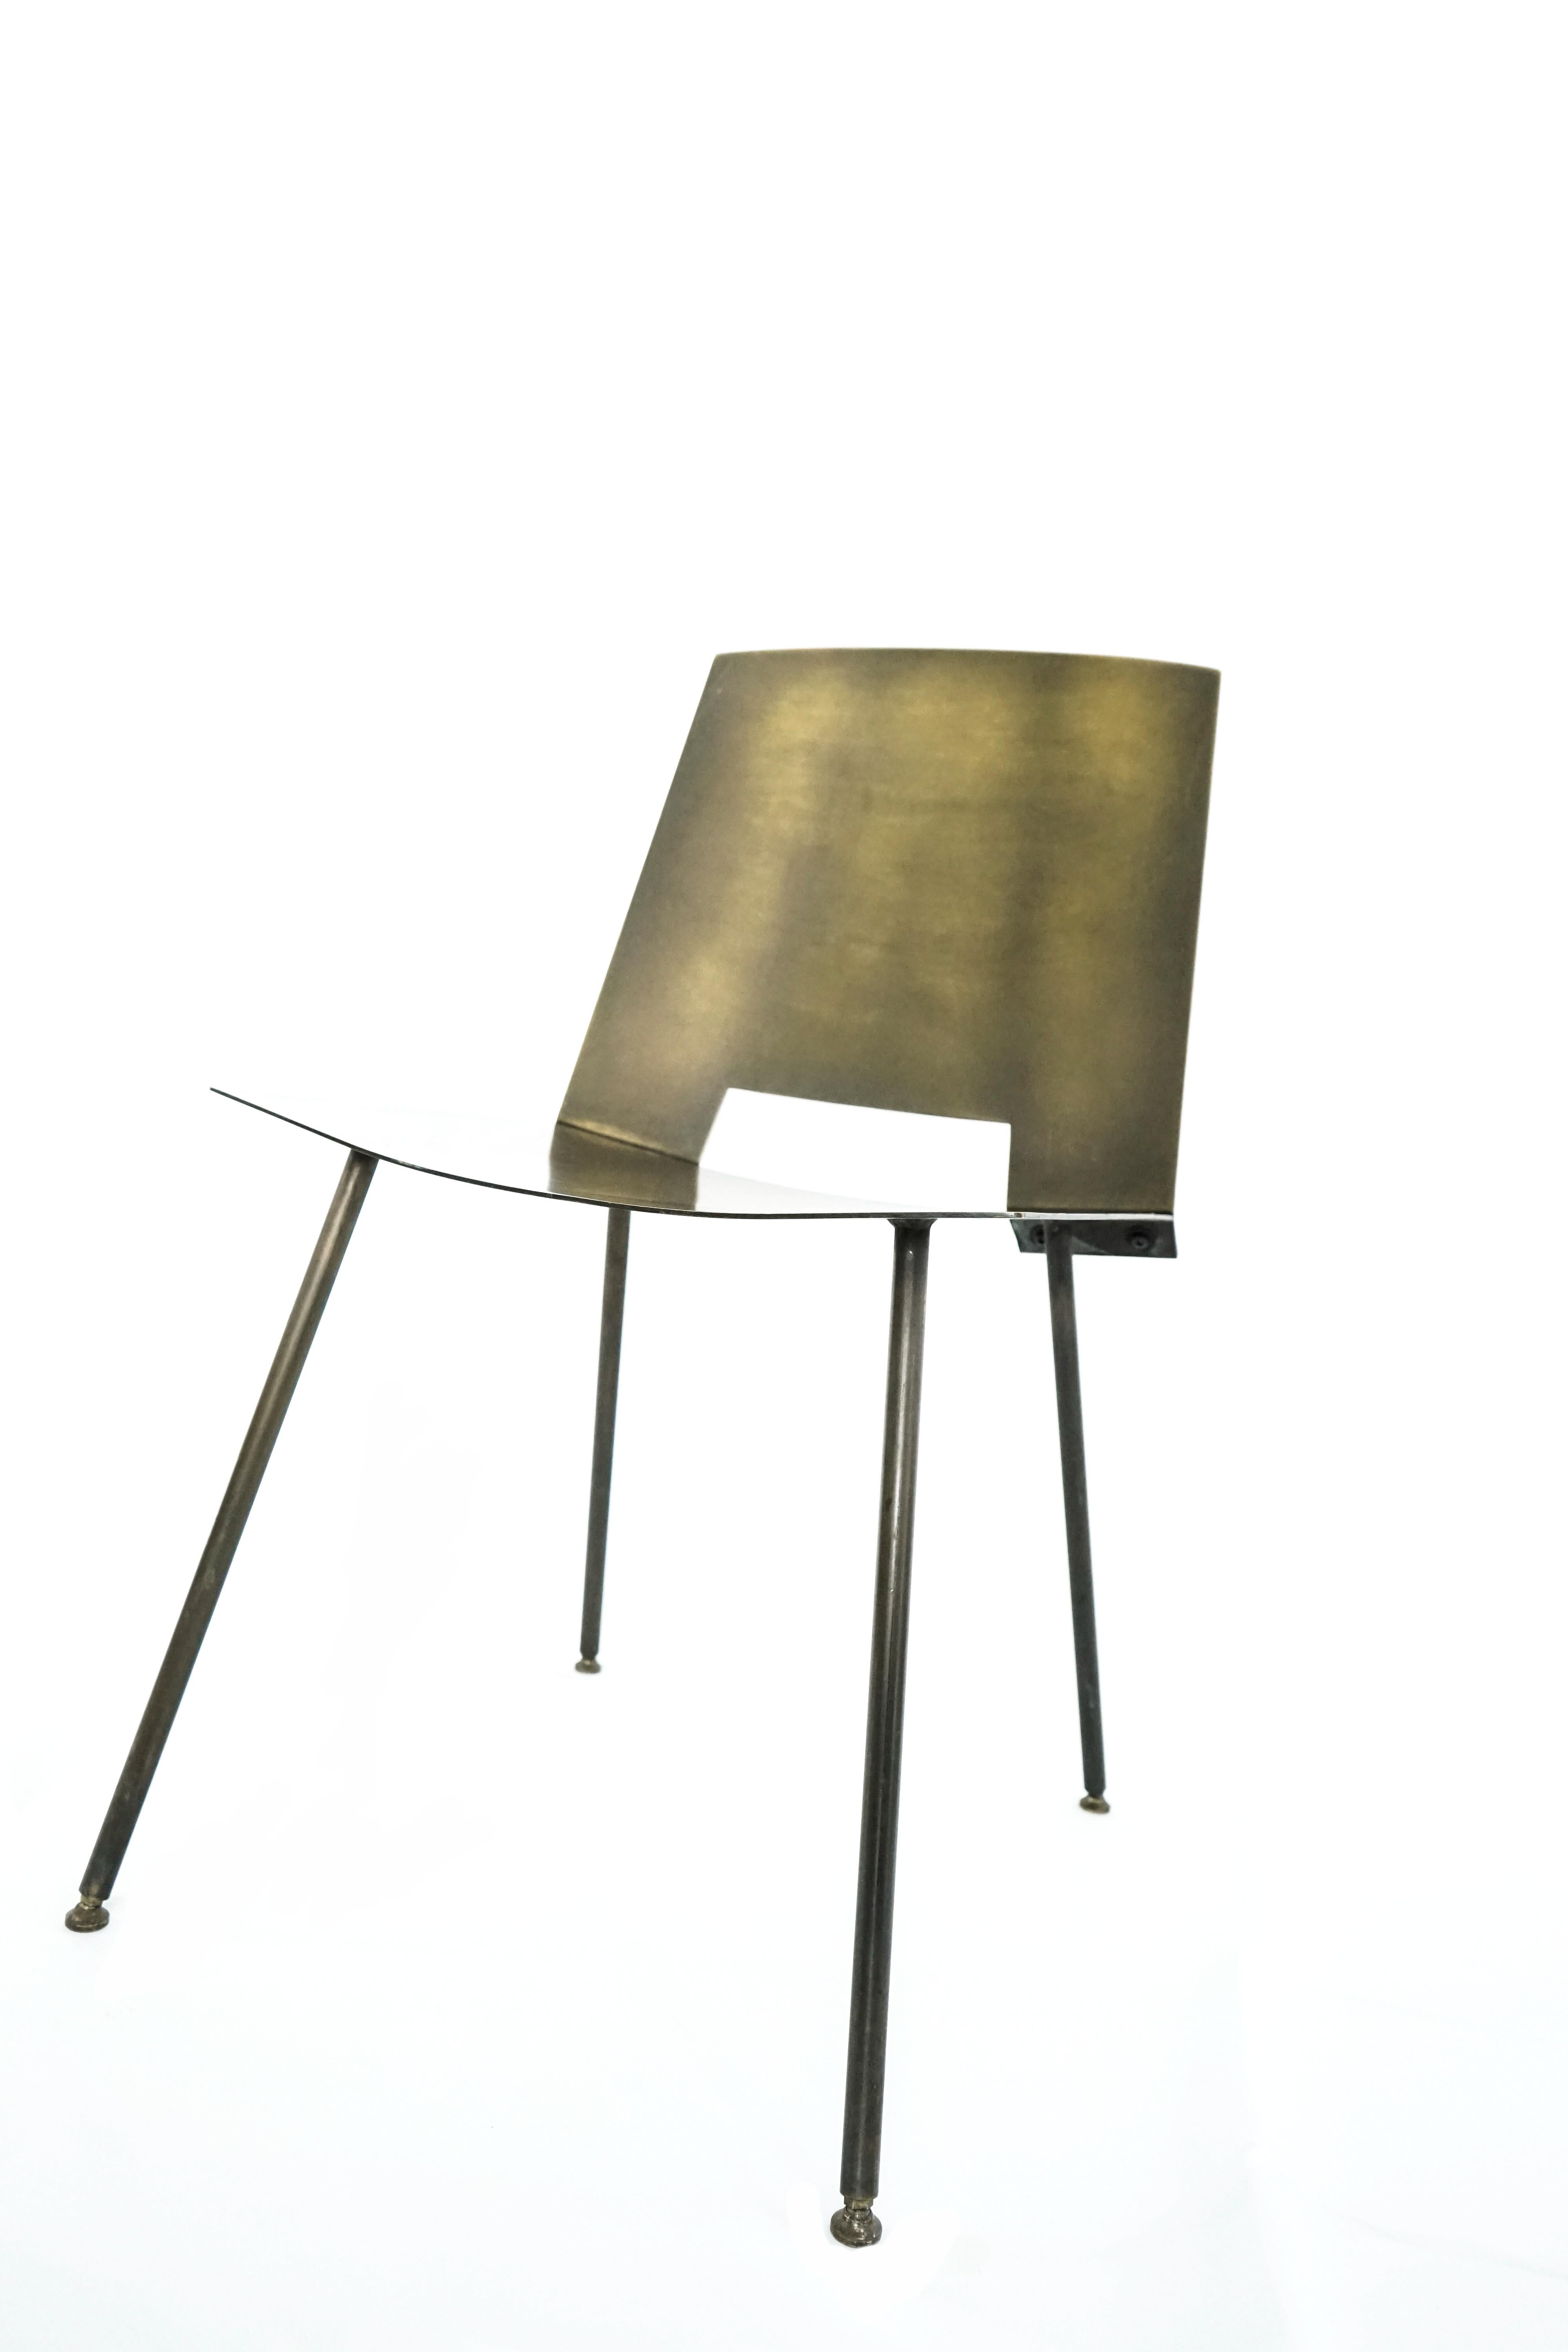 American 21st century, contemporary, modern, Minimalist, Bronze Sheet Metal Side Chair  For Sale